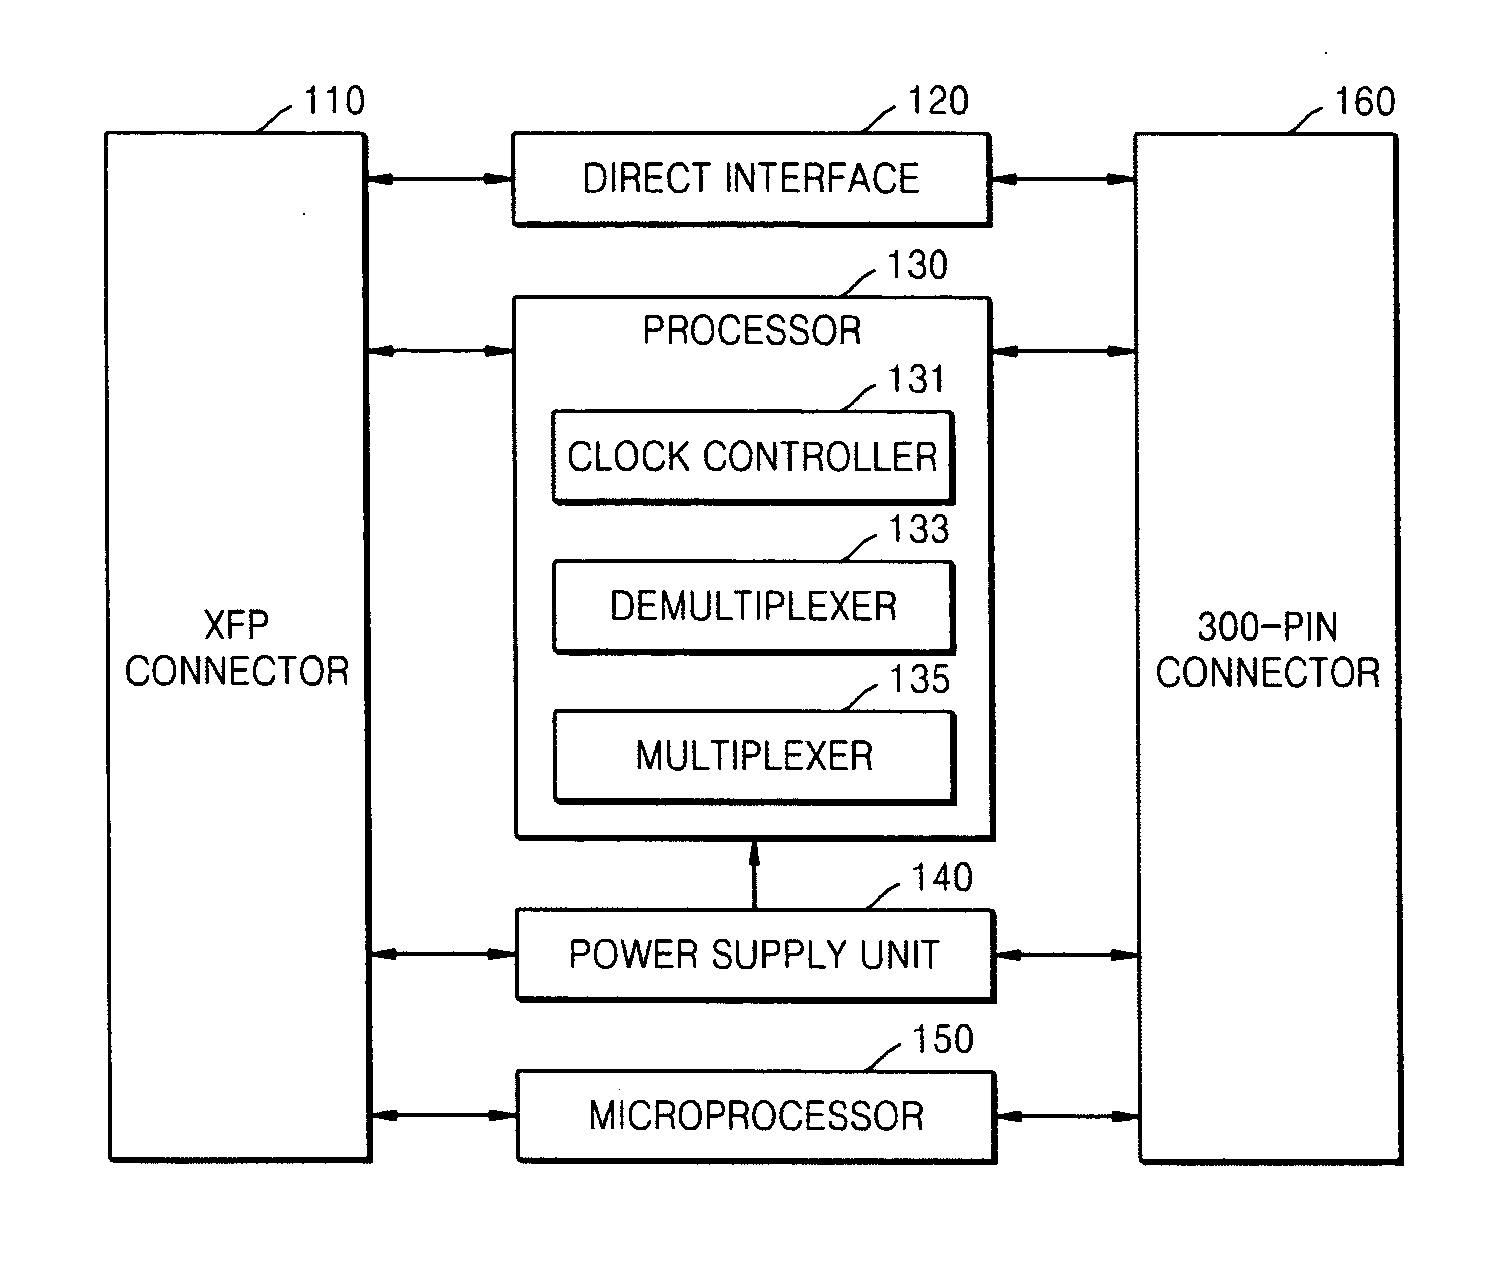 Apparatus and method for interfacing XFP optical transceiver with 300-pin MSA optical transponder